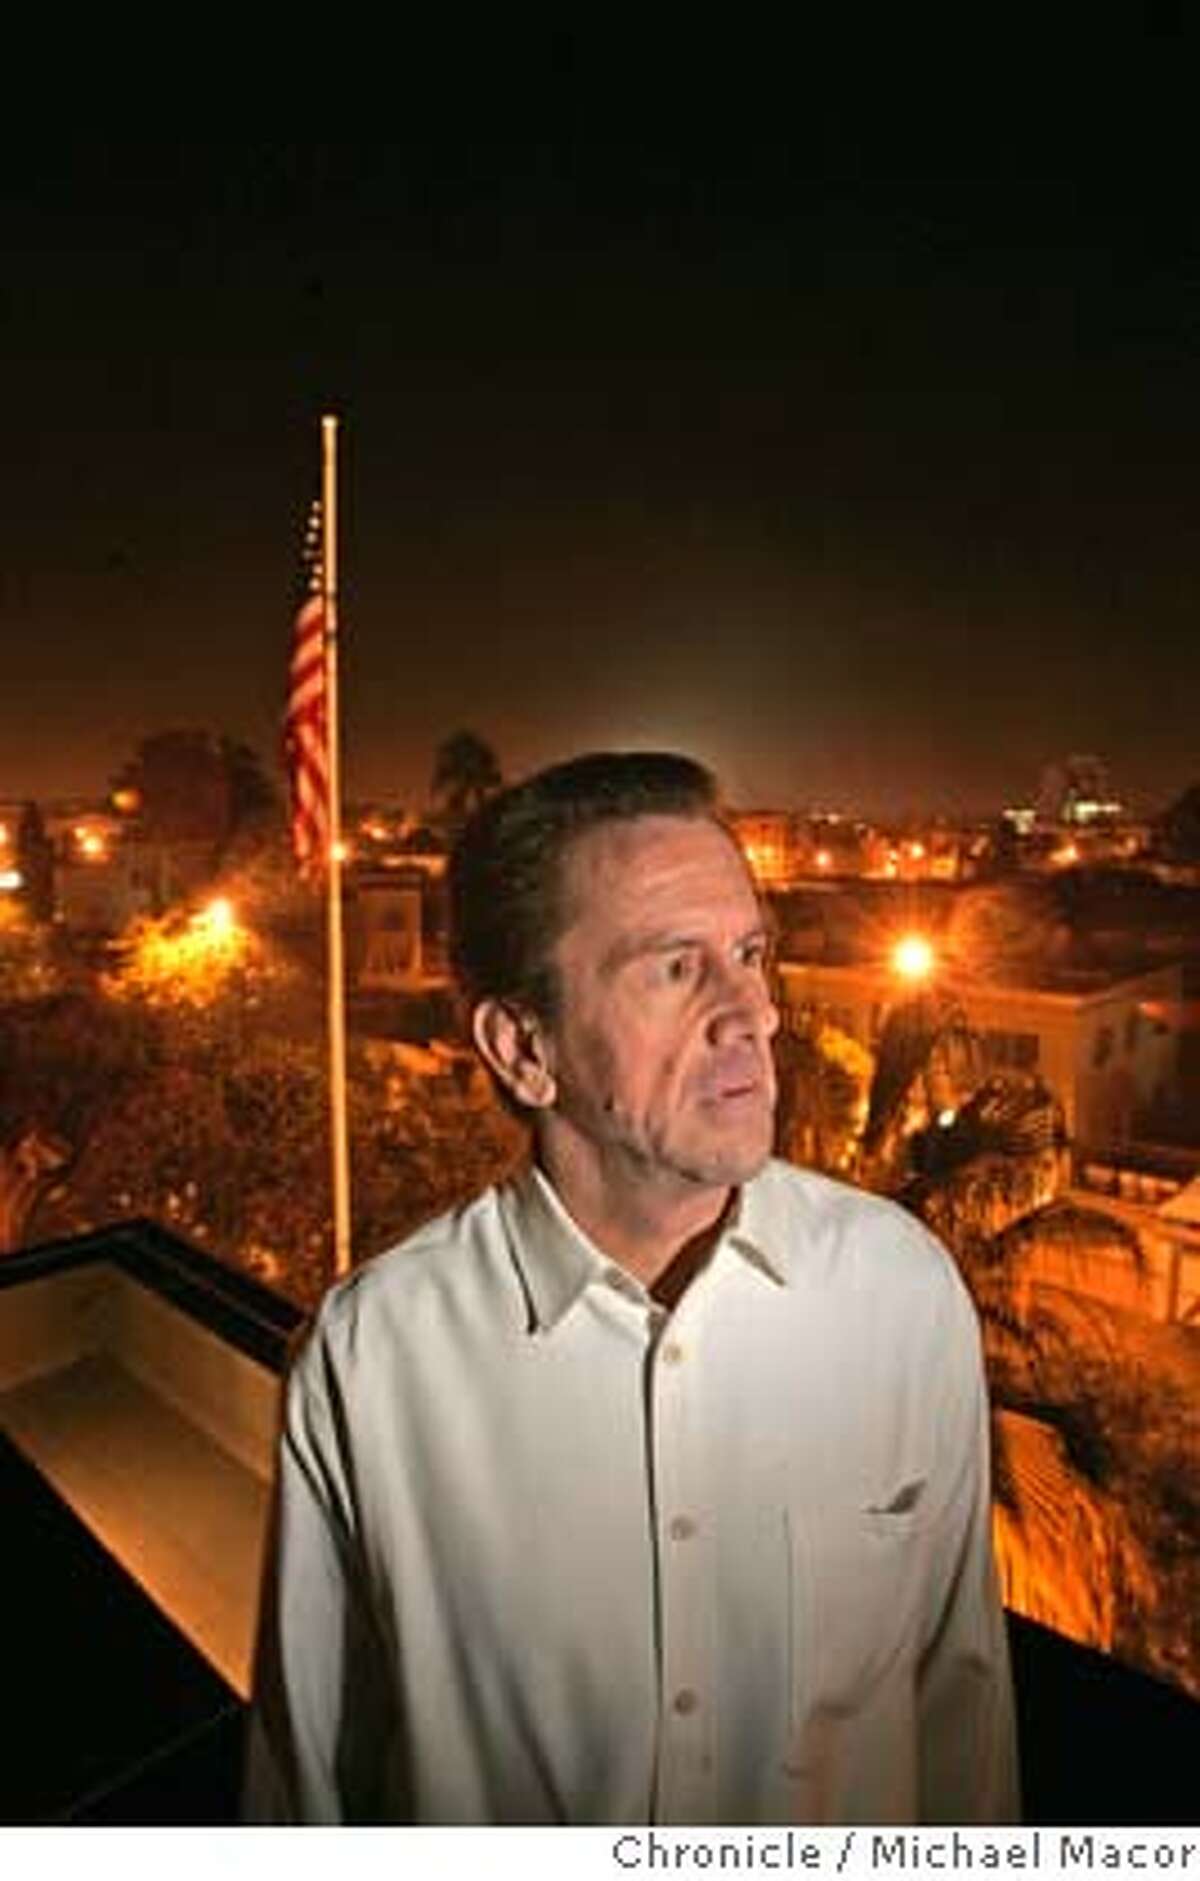 The Ambassador on the roof of his residence, overlooking downtown Rabat. The US Ambassador in Morocco, Thomas Riley, hosts a holiday party for Embassy workers a week before Christmas. Ambassador's residence in Rabat. 12/18/04 Rabat, Morocco Michael Macor / San Francisco Chronicle